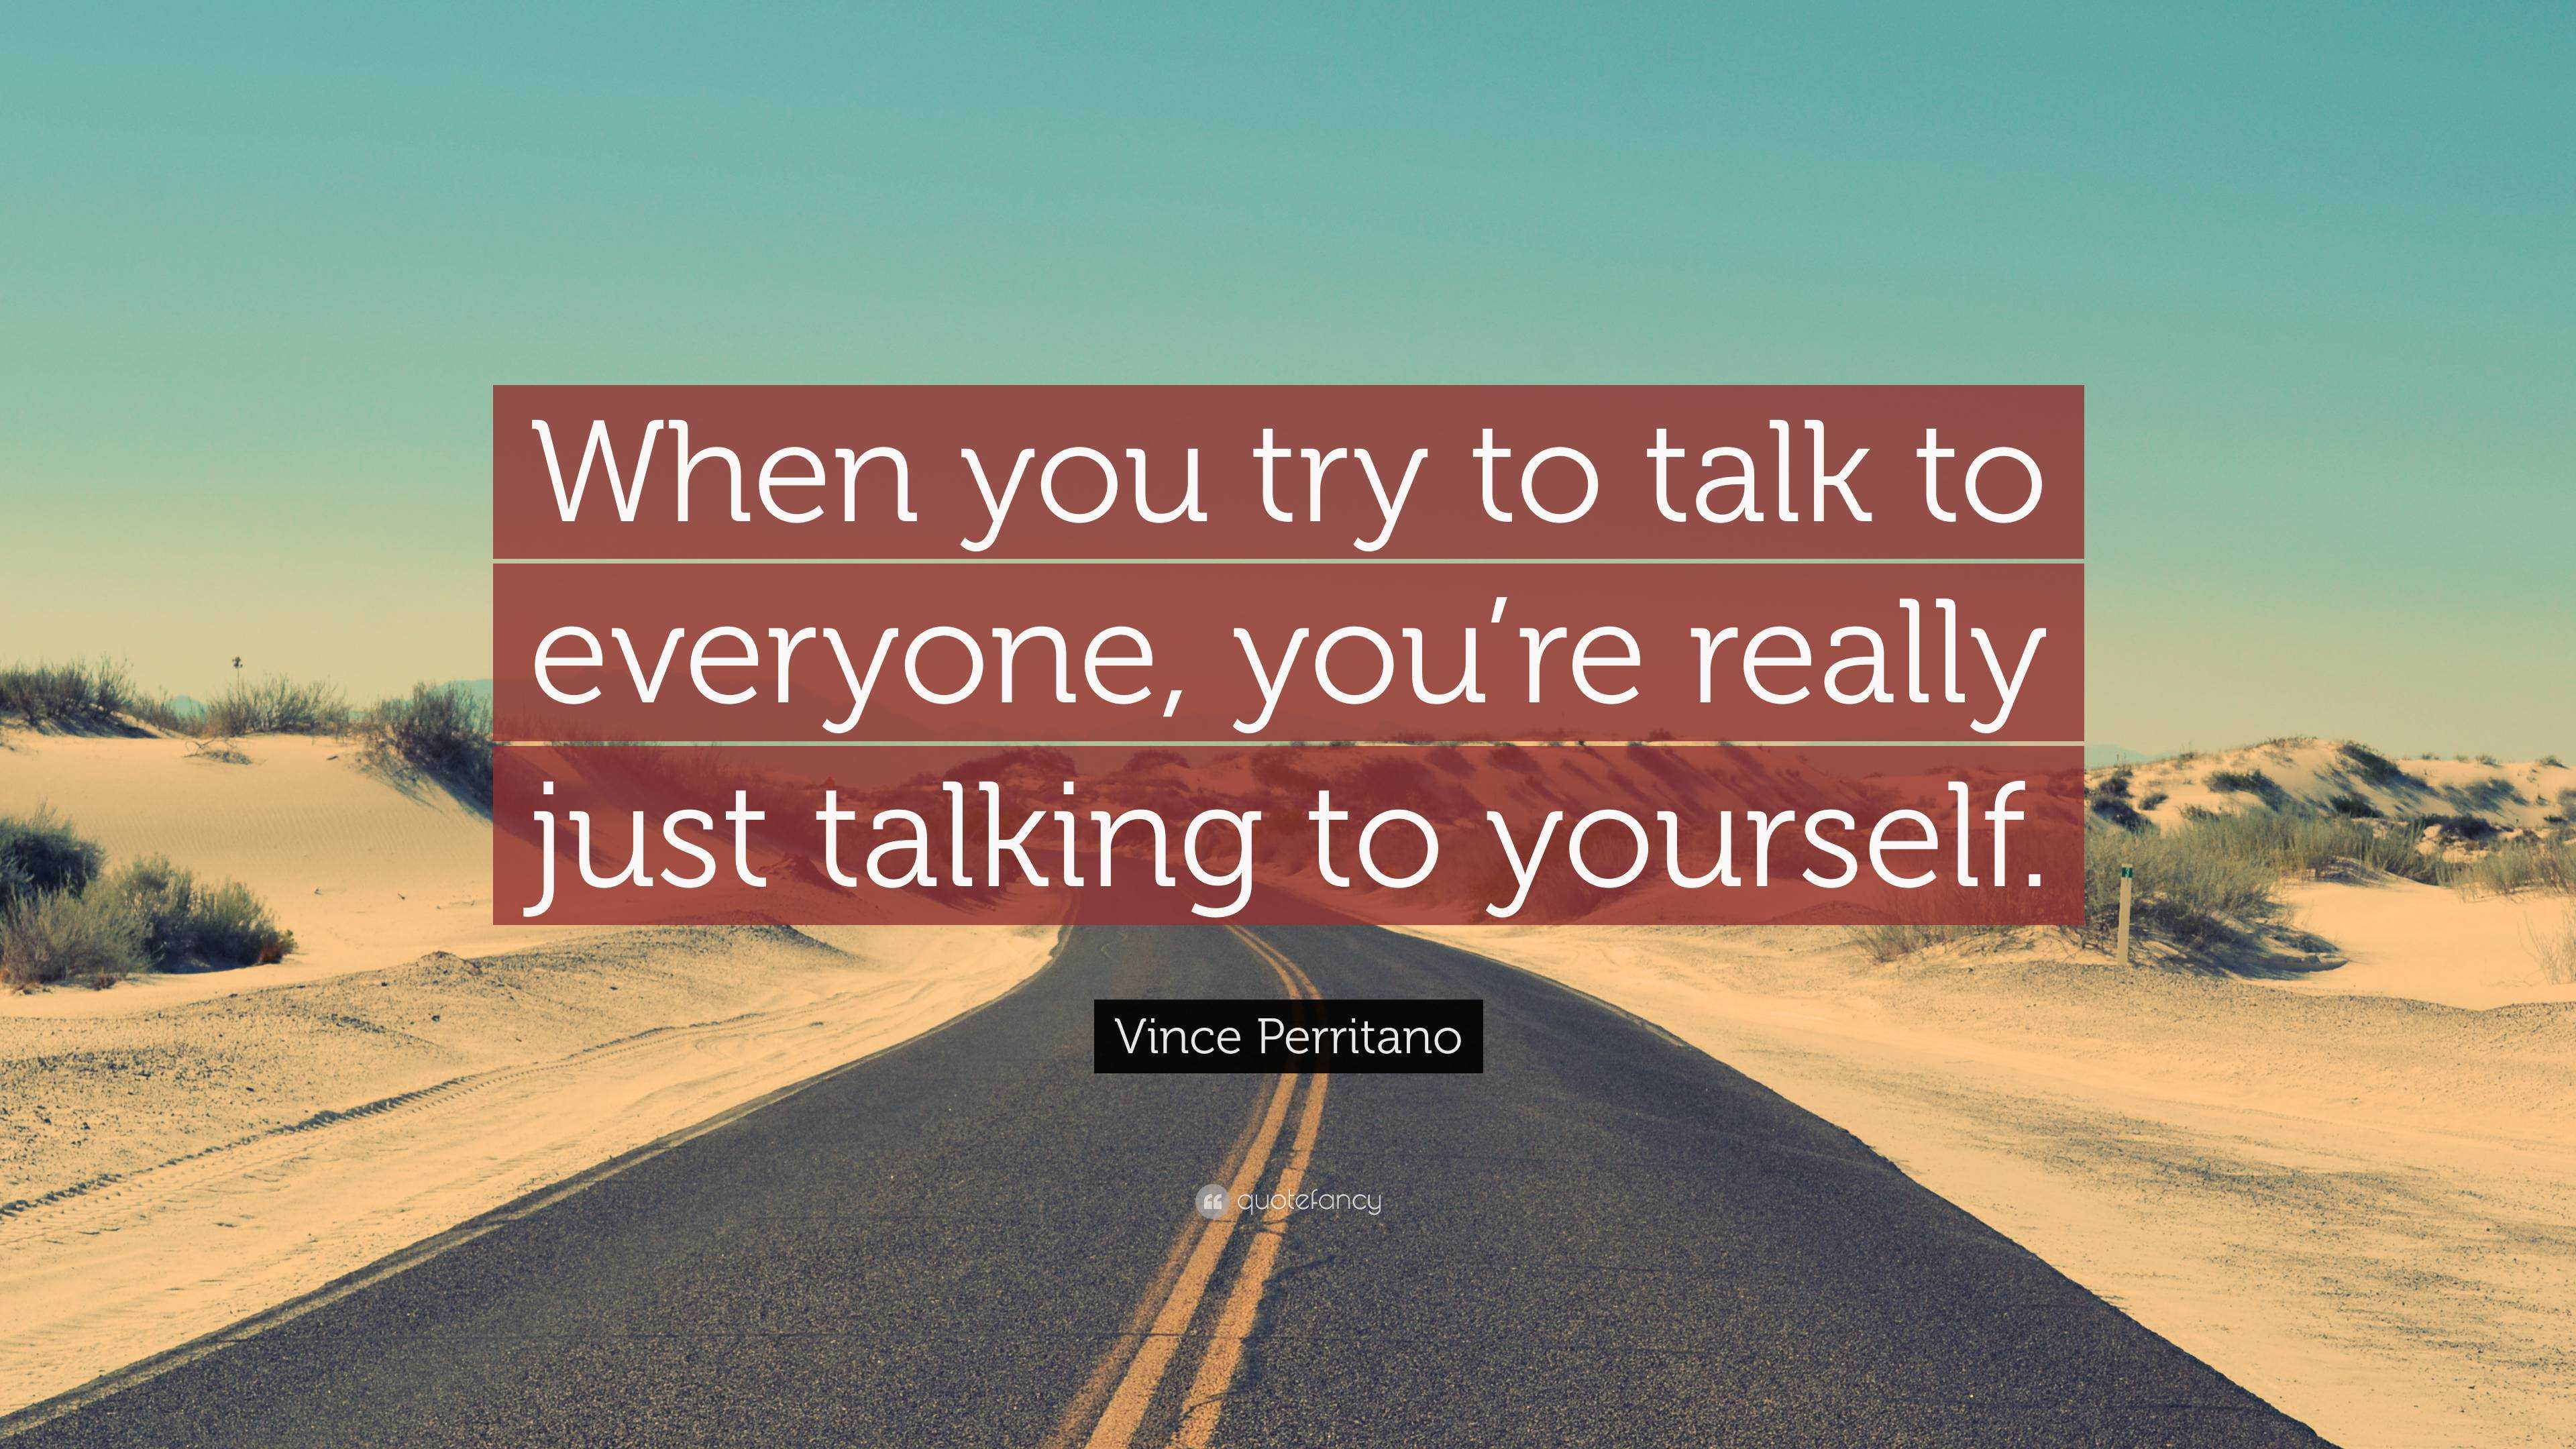 Vince Perritano Quote: “When you try to talk to everyone, you’re really ...